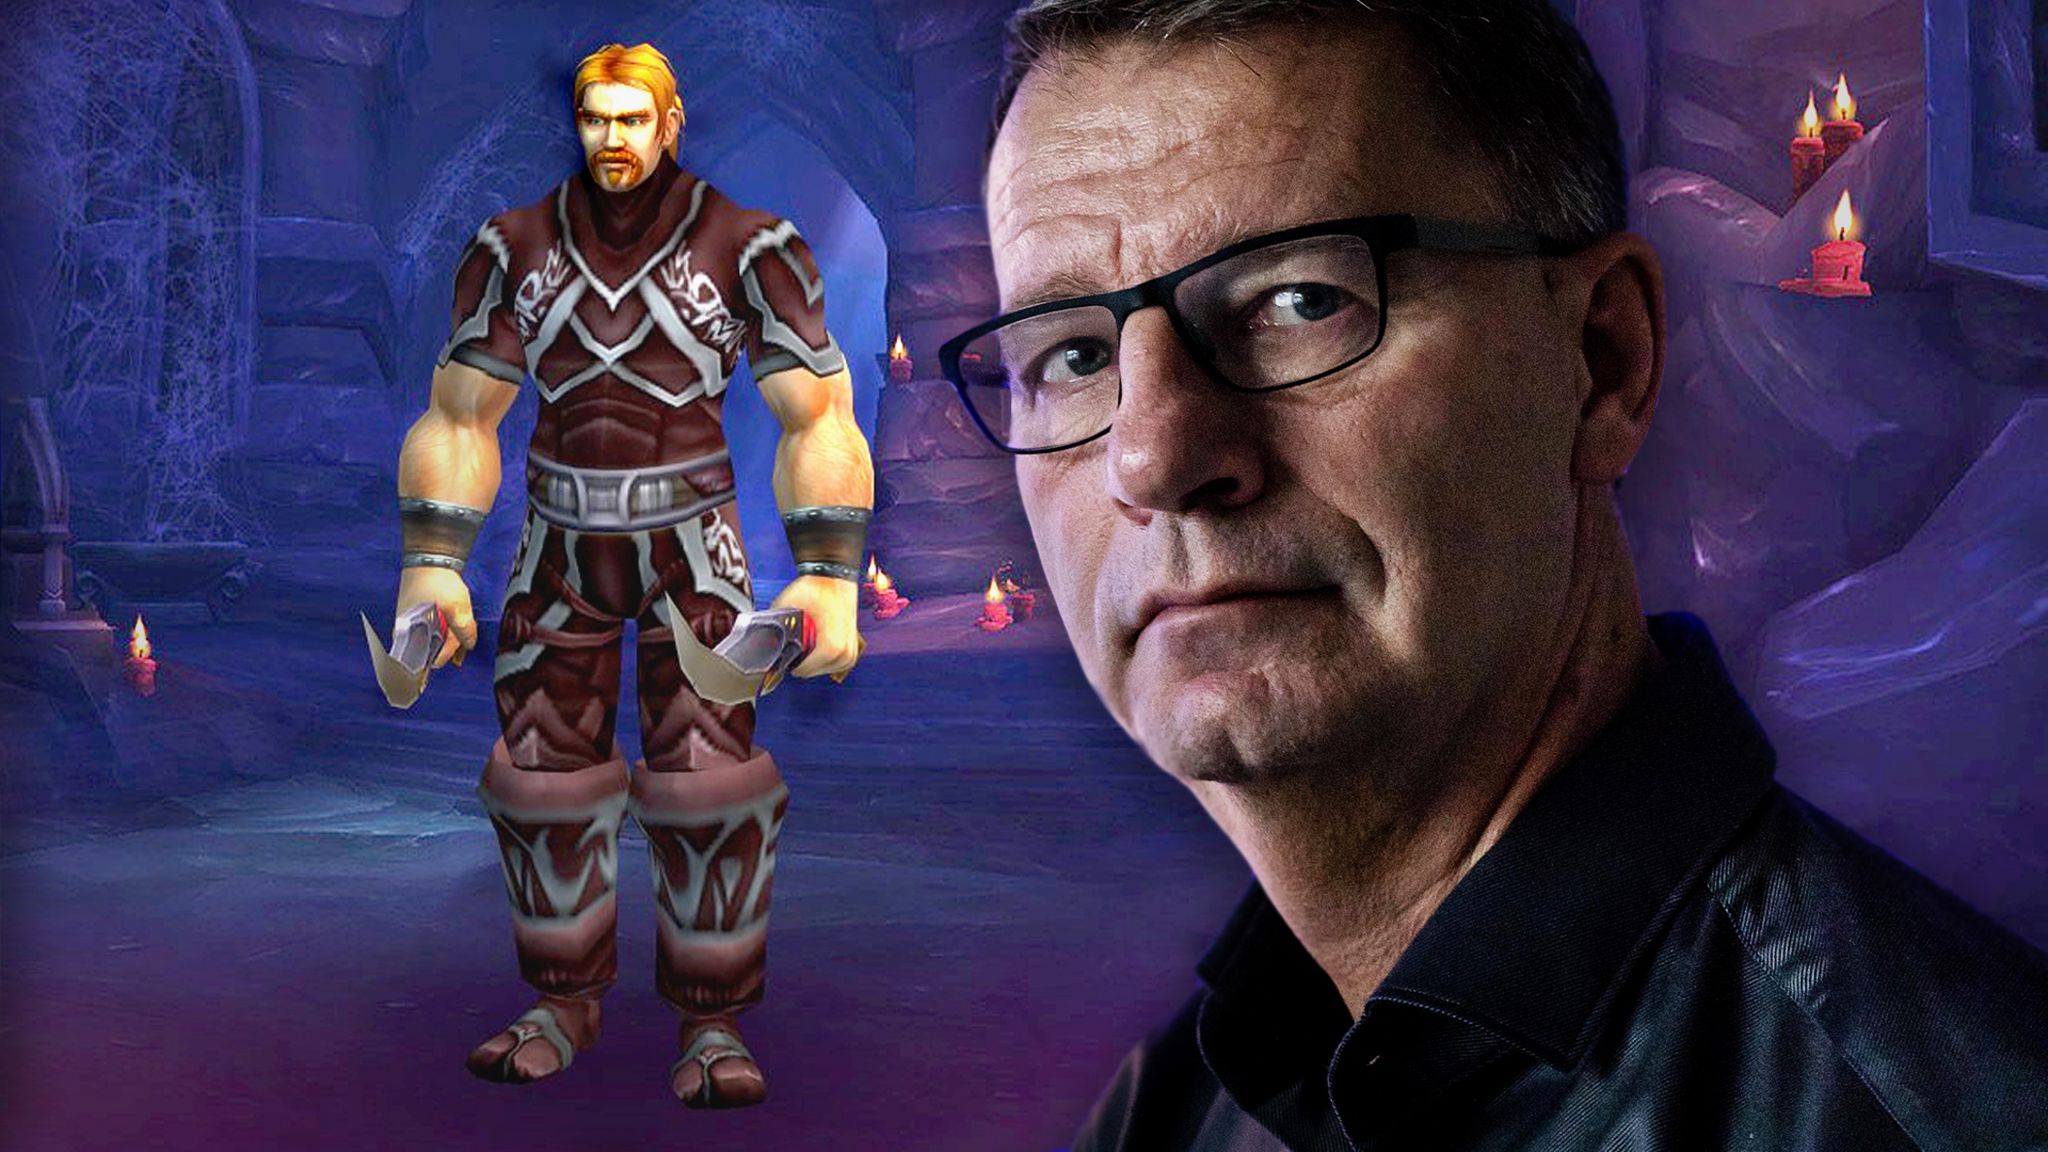 Robert Steen and his son Mats's online character, Ibelin, in World of Warcraft